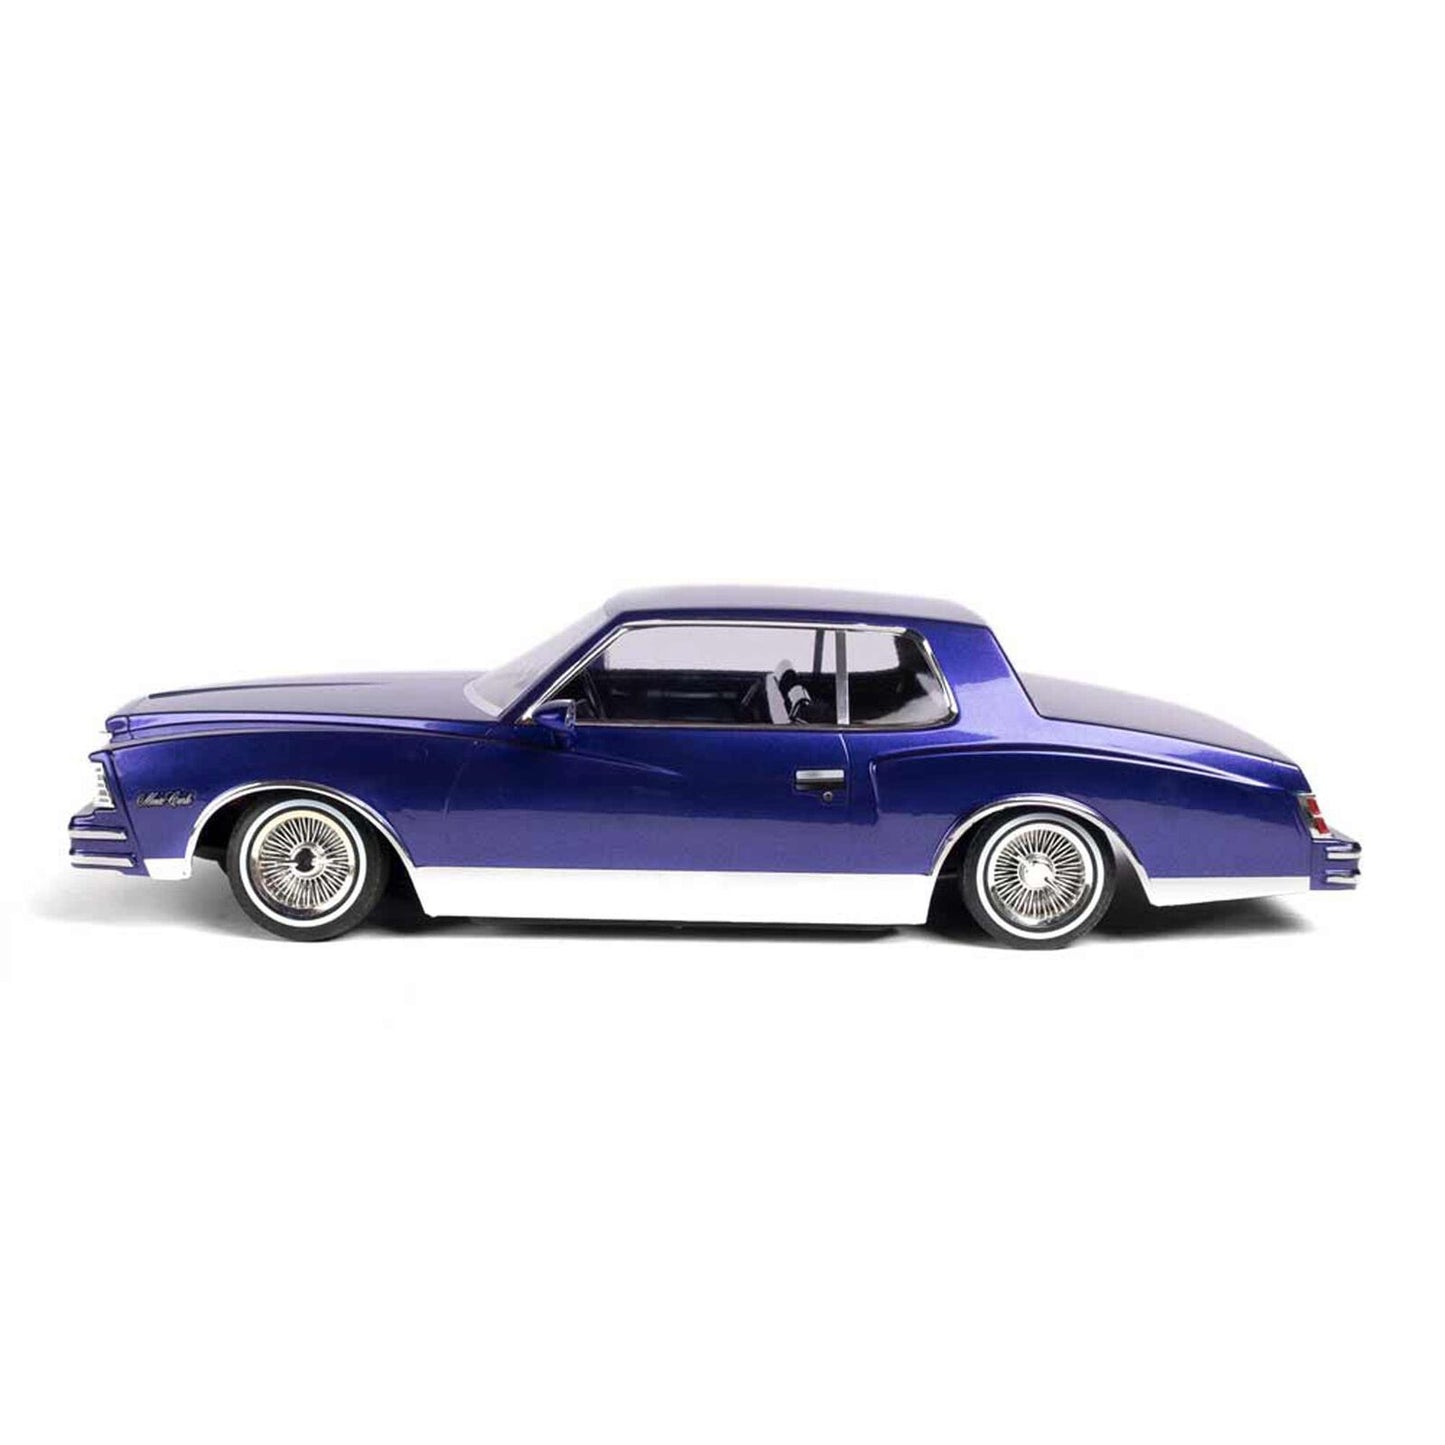 Red Cat 1/10 1979 Chevrolet Monte Carlo Brushed 2WD Lowrider RTR, Purple